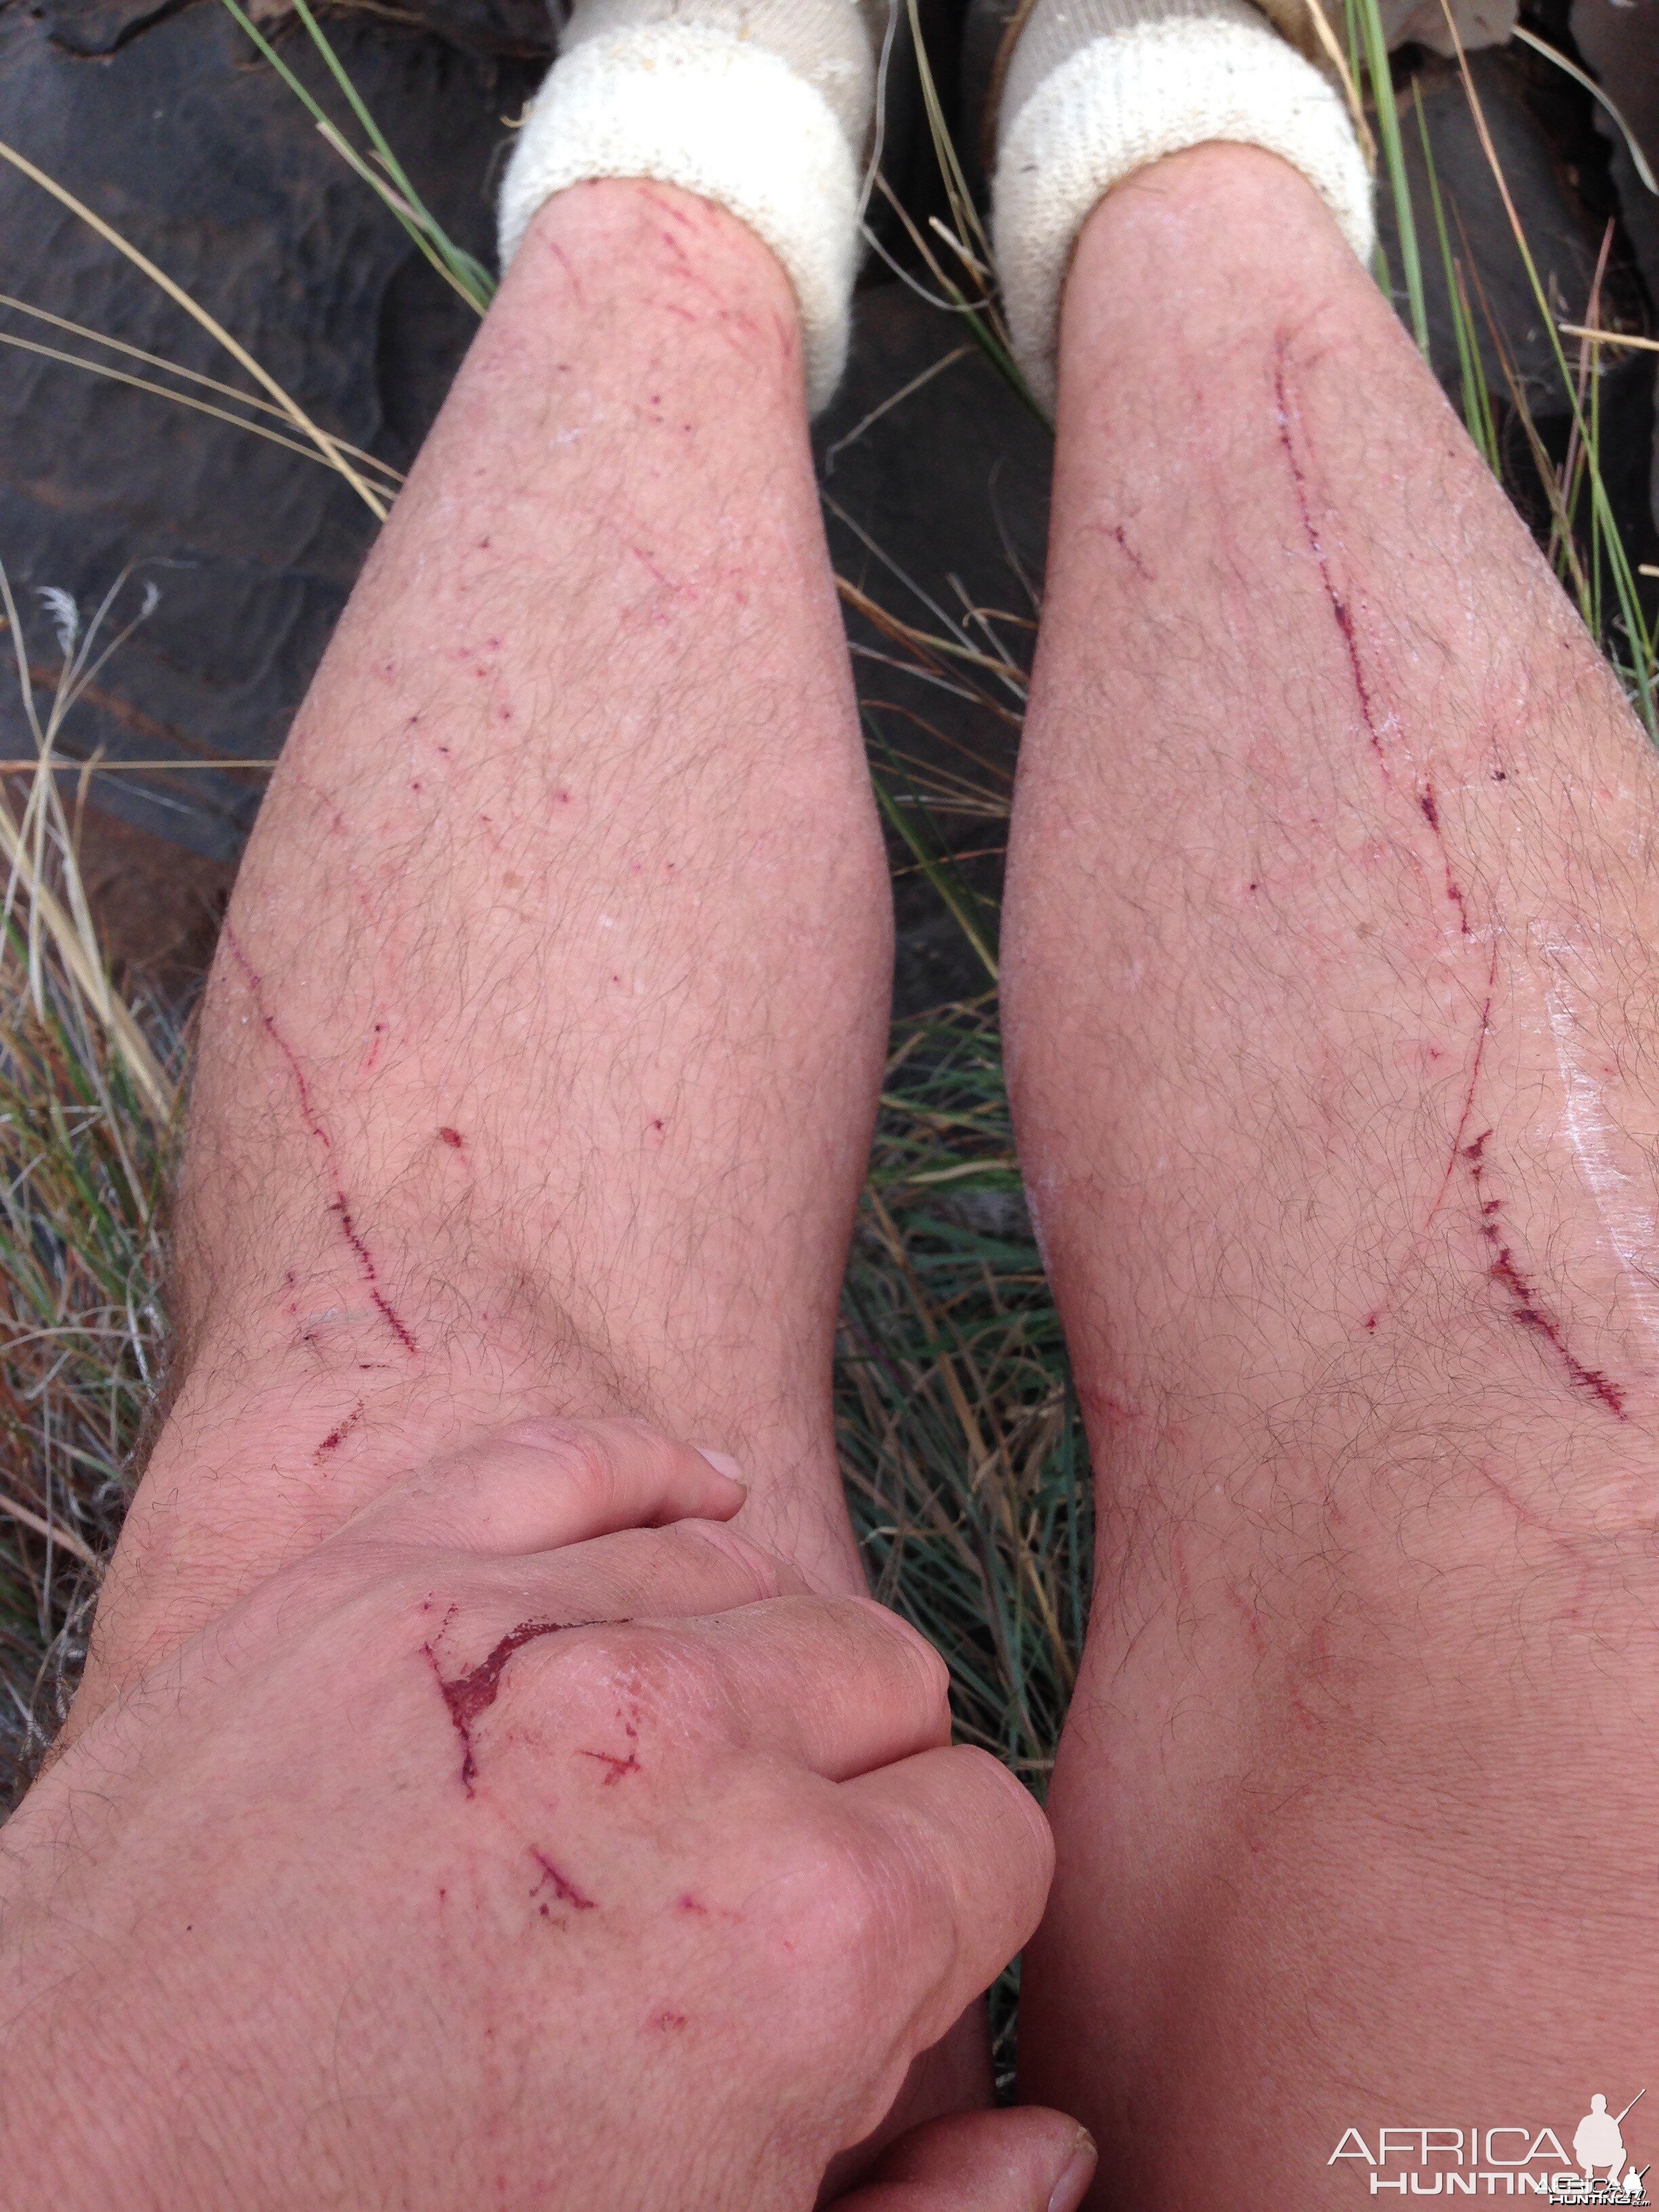 My Legs After A Day Of Barbary Sheep Hunting